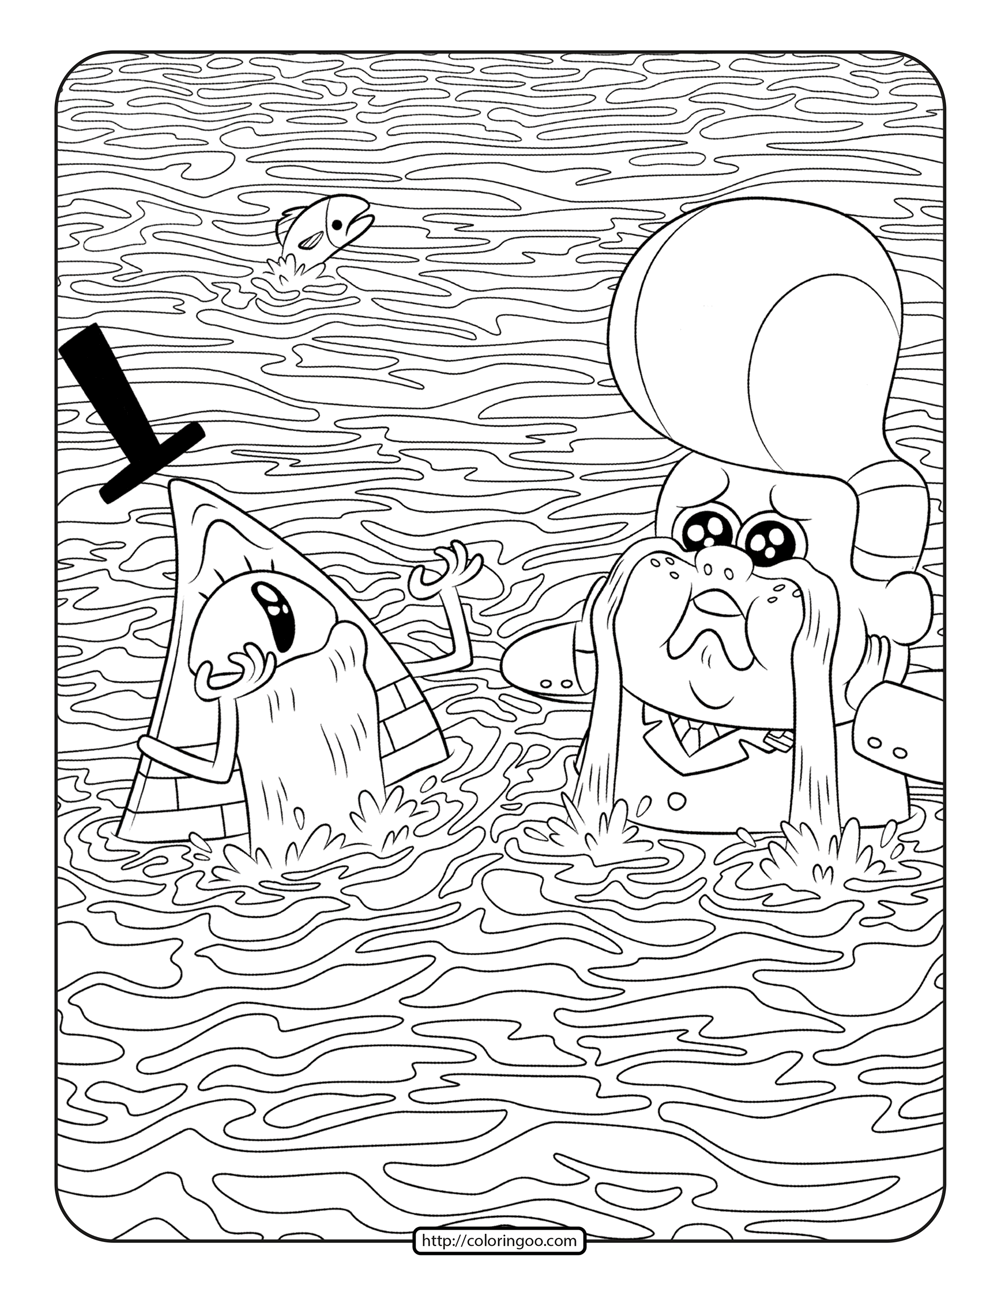 Gideon Gleeful and Bill Cipher Crying Coloring Page